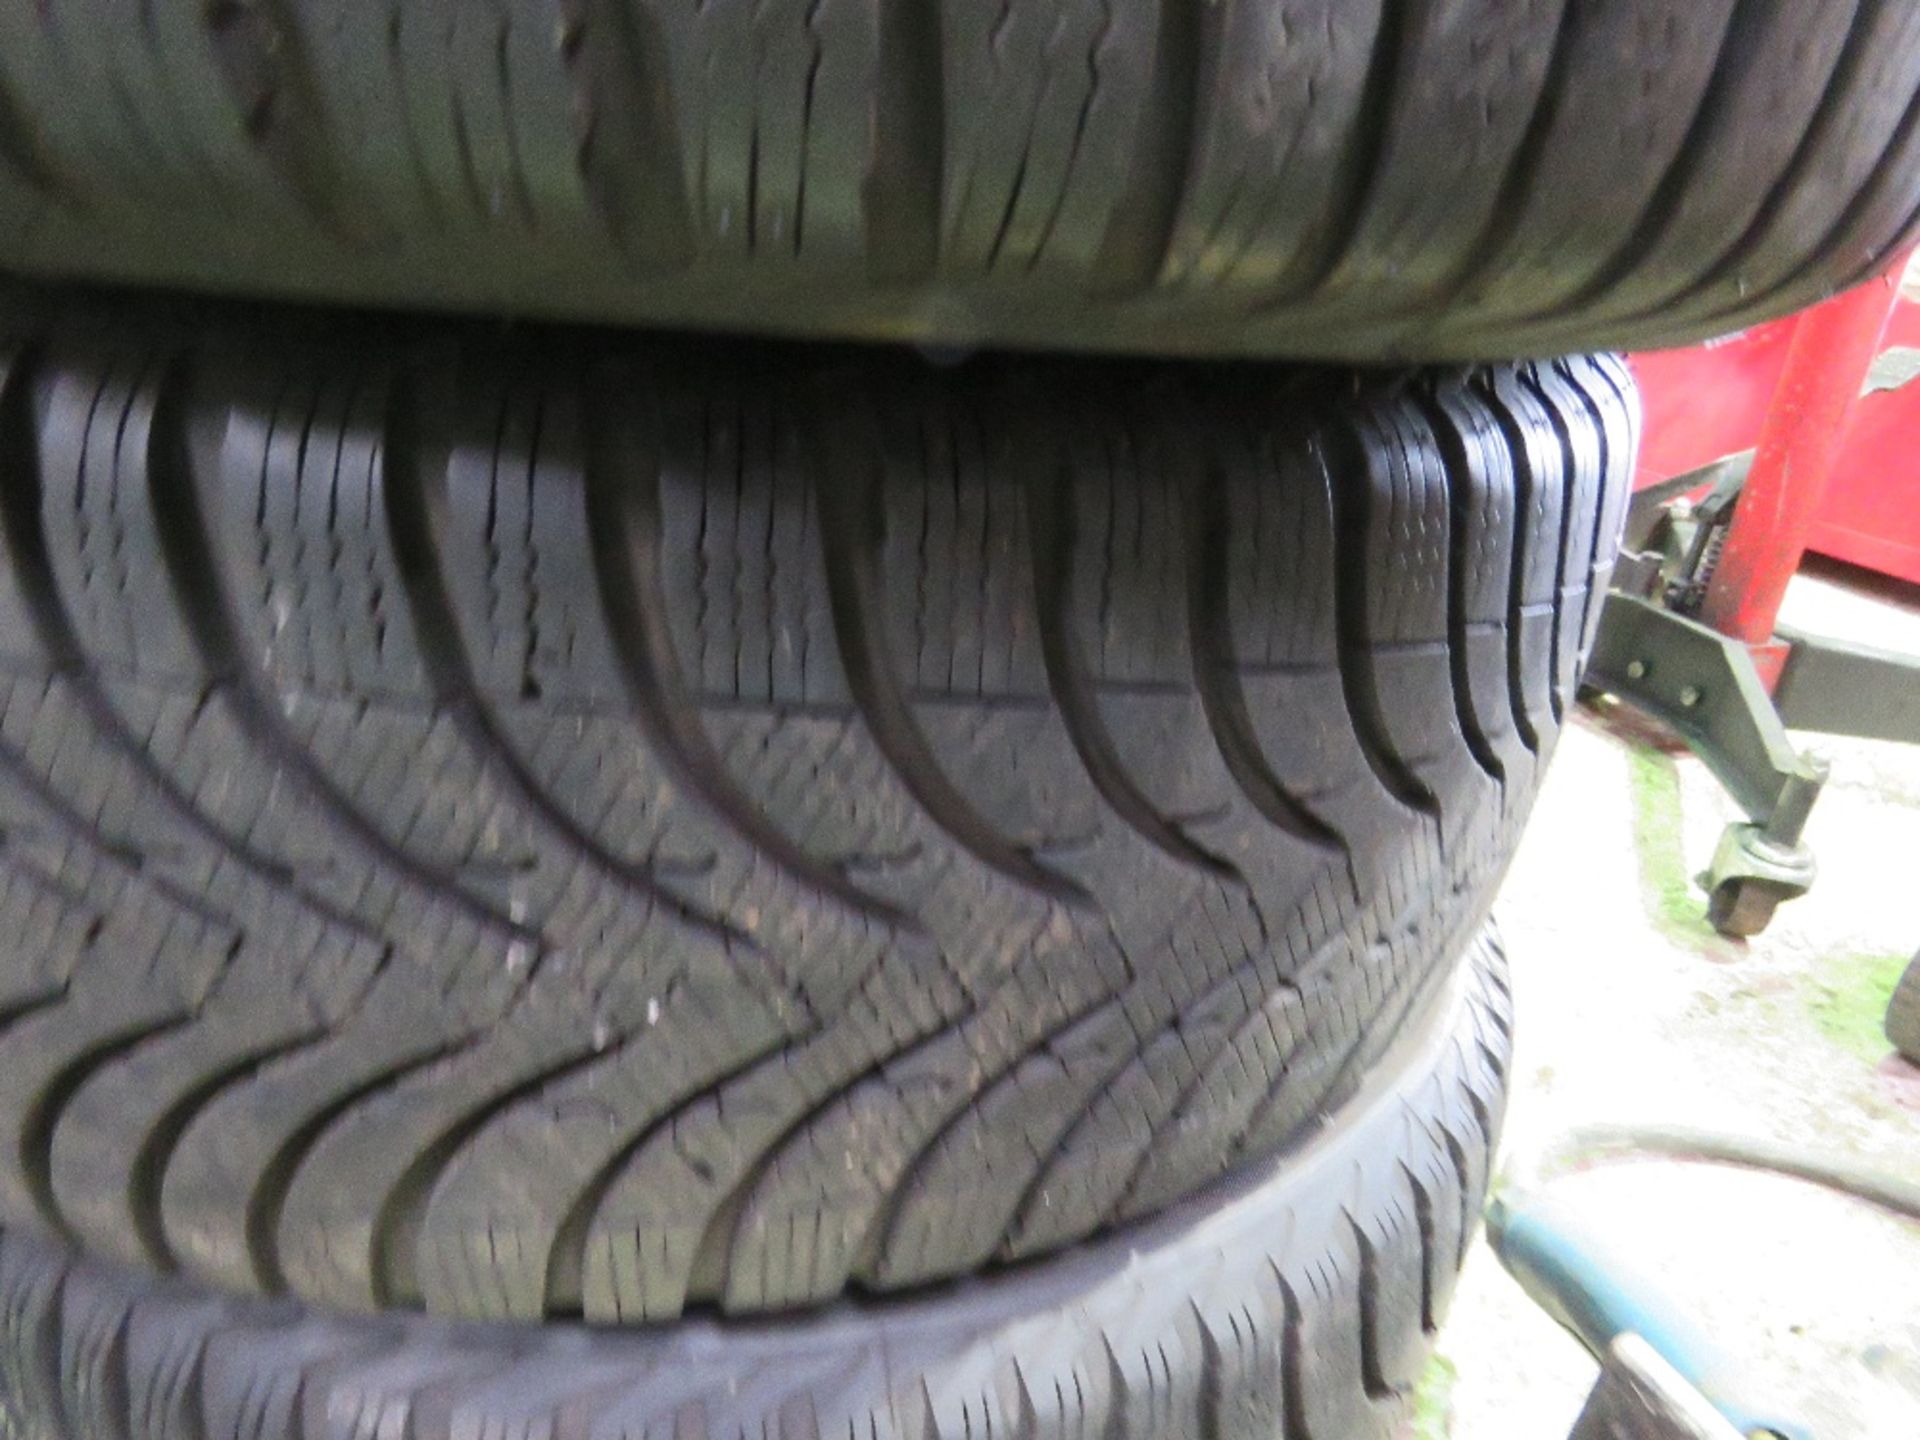 SET OF 4NO ENZO 225-45/17 ALLOY WHEELS AND TYRES, SNOW / WINTER TYRES FITTED. - Image 4 of 9